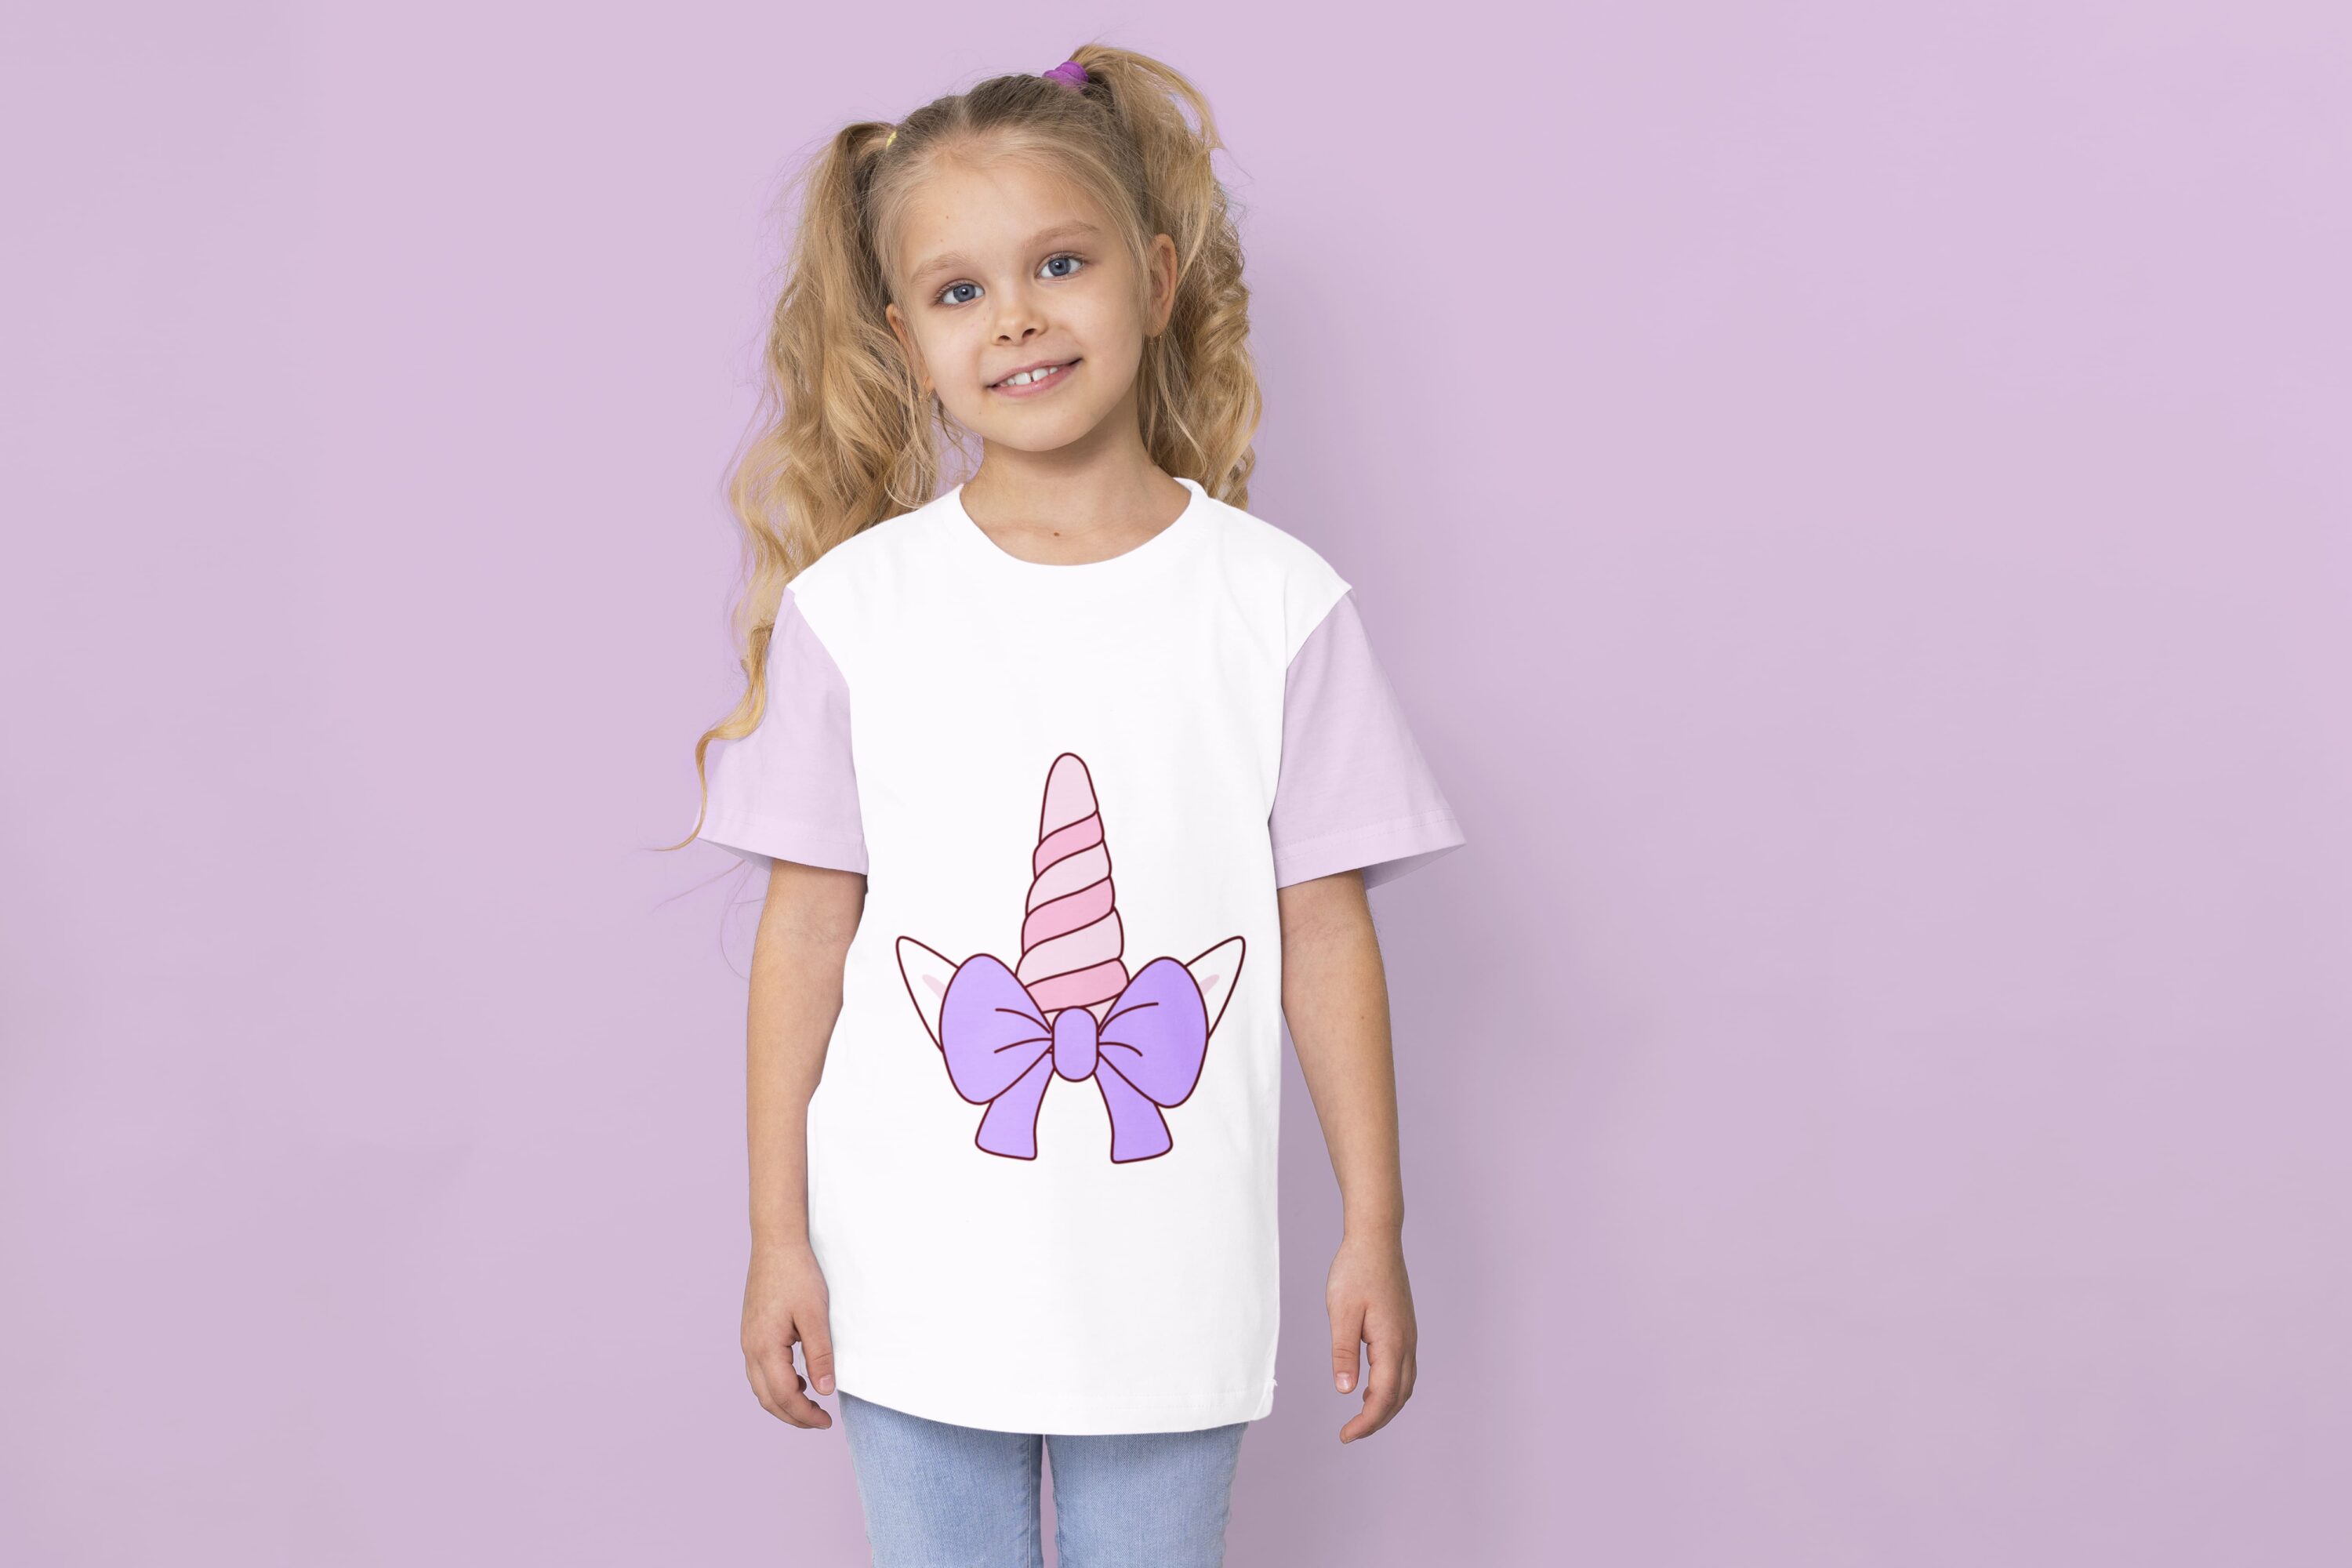 A white t-shirt with lavender sleeves and a pink unicorn horn with a purple bow on a girl against a lavender background.